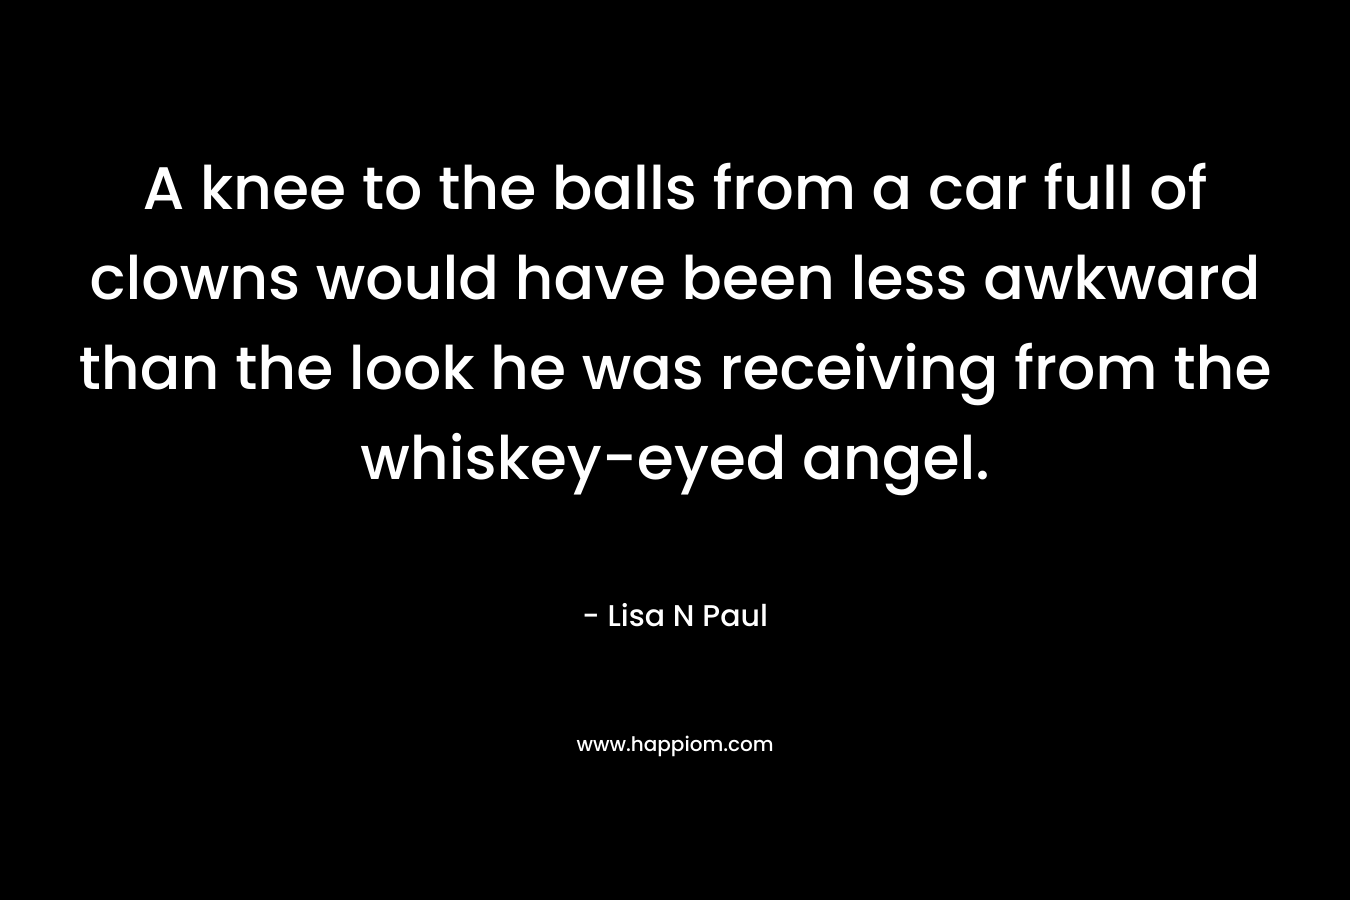 A knee to the balls from a car full of clowns would have been less awkward than the look he was receiving from the whiskey-eyed angel. – Lisa N Paul